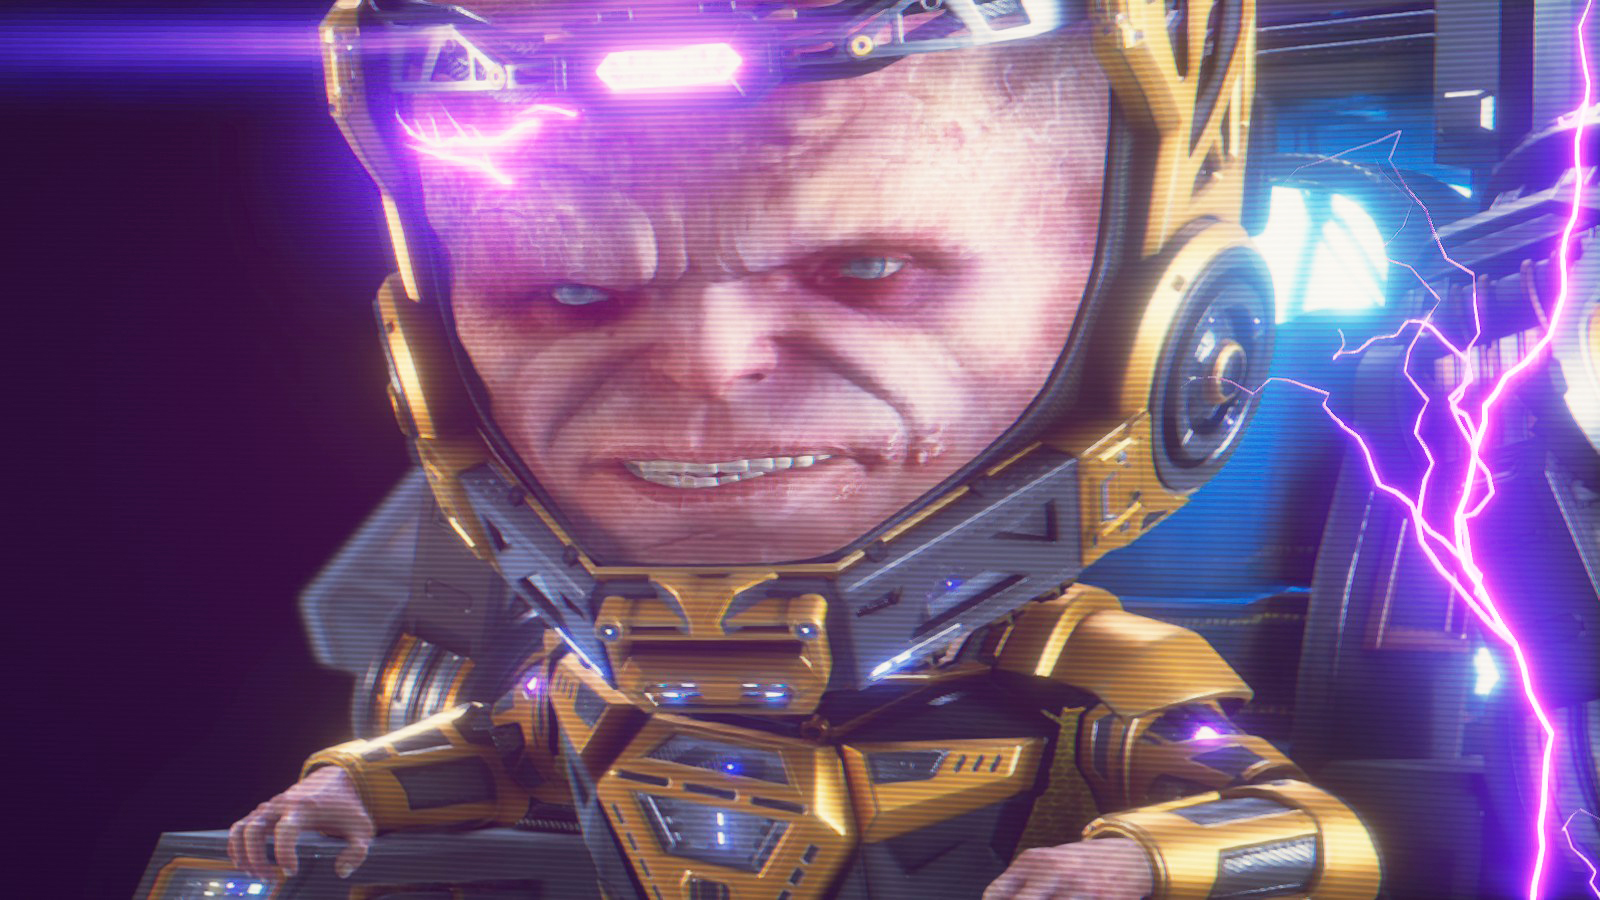 Who Plays MODOK In Ant-Man And The Wasp: Quantumania